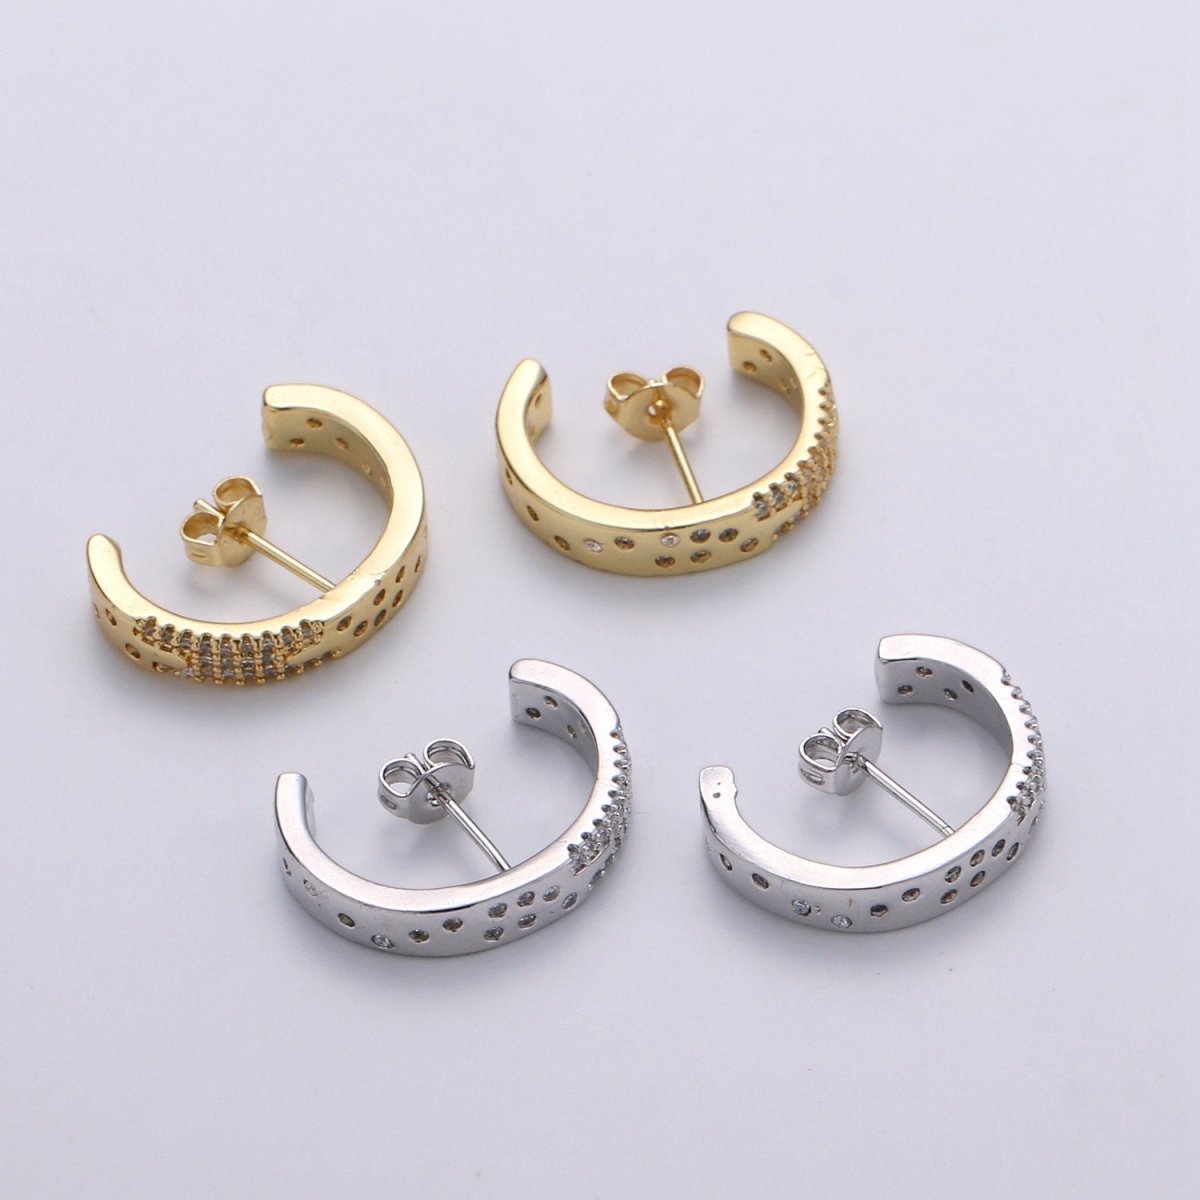 Micro Pave Suspender Earrings • Gold Filled ear climbers • cuff earrings • Gold hoop stud earrings • Satement Earring jewelry Q-245 Q-246 - DLUXCA